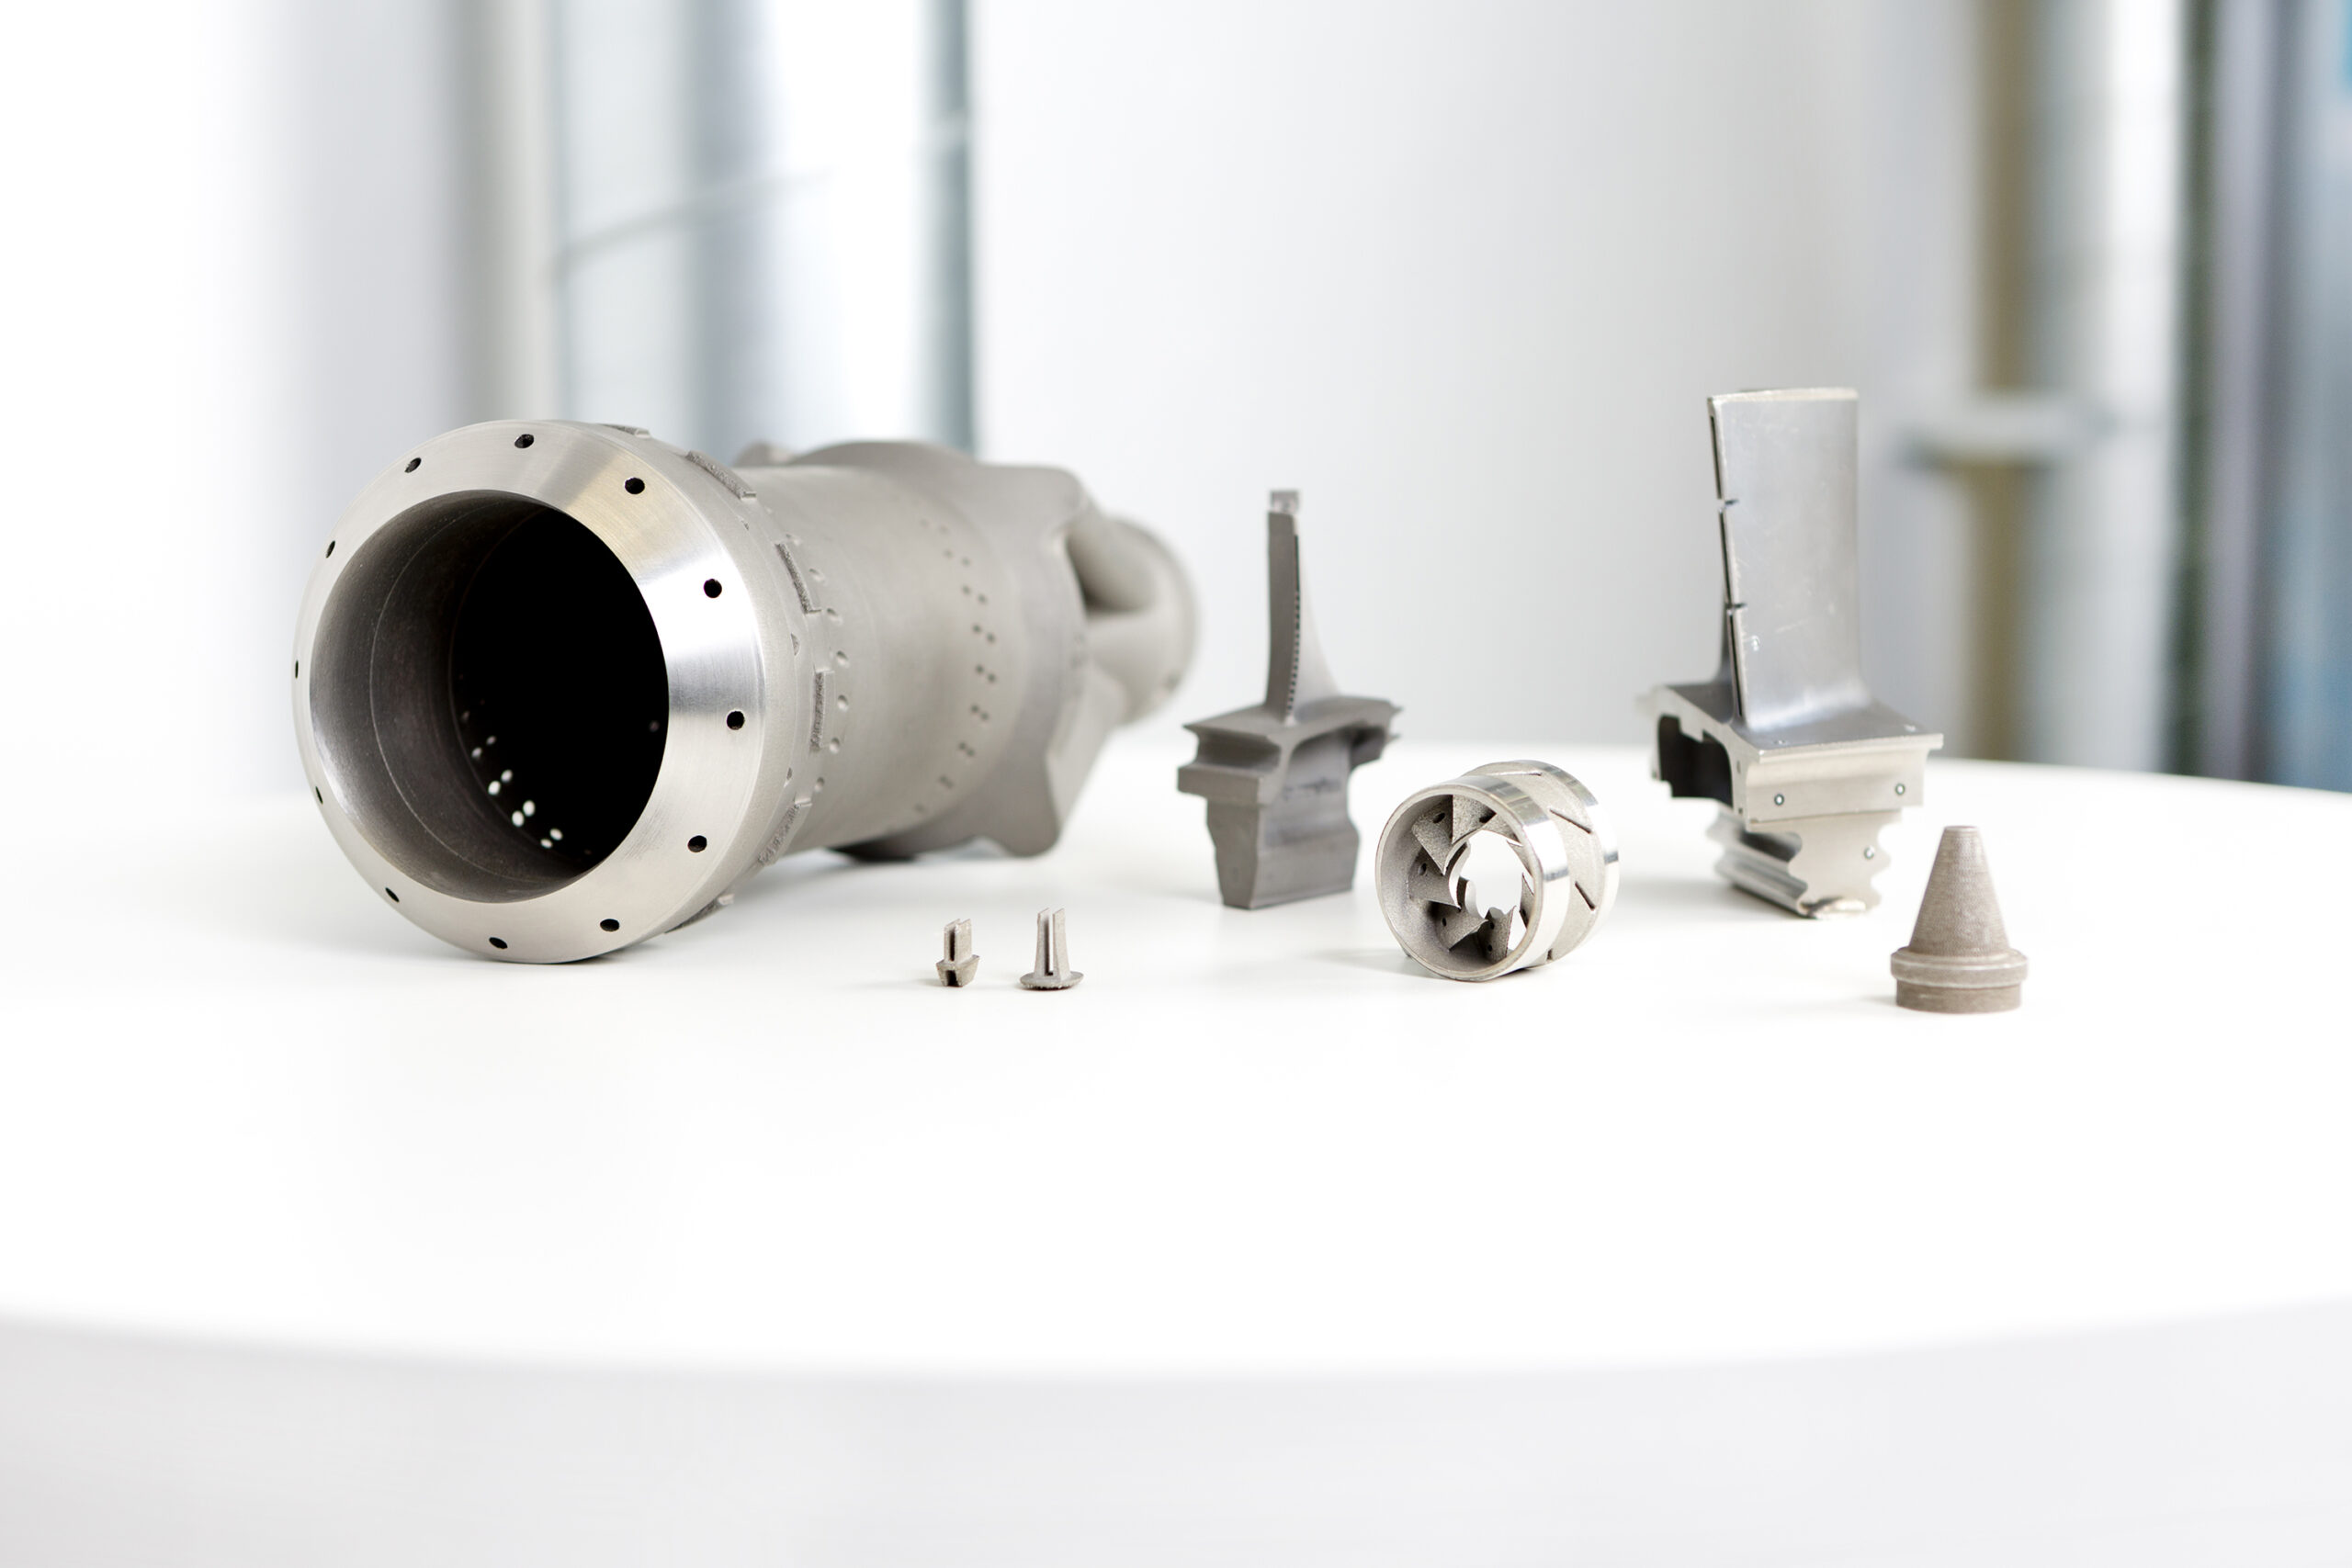 Aerospace components made with additive manufacturing (AM)